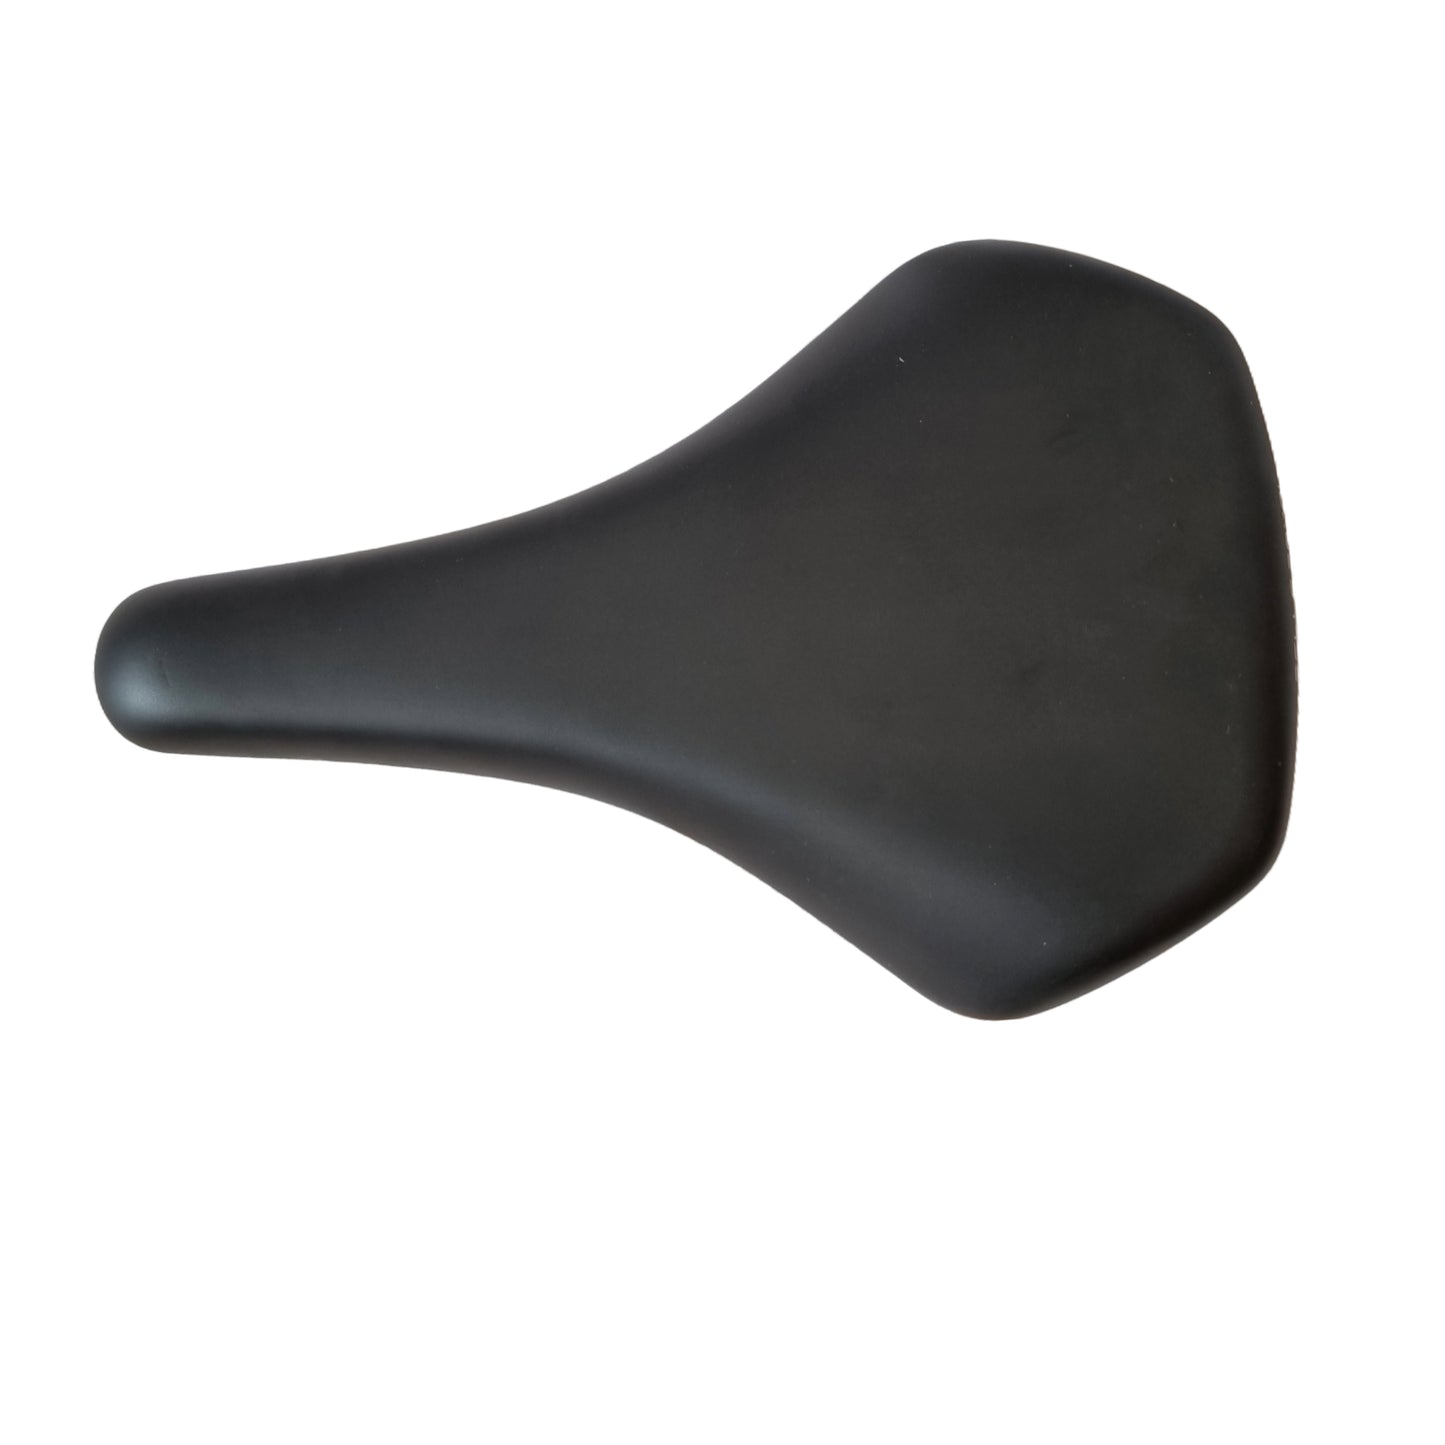 Selle Royal Saddle for MTB Essenza Moderate Mountain Cycling Saddle Black by omobikes top view